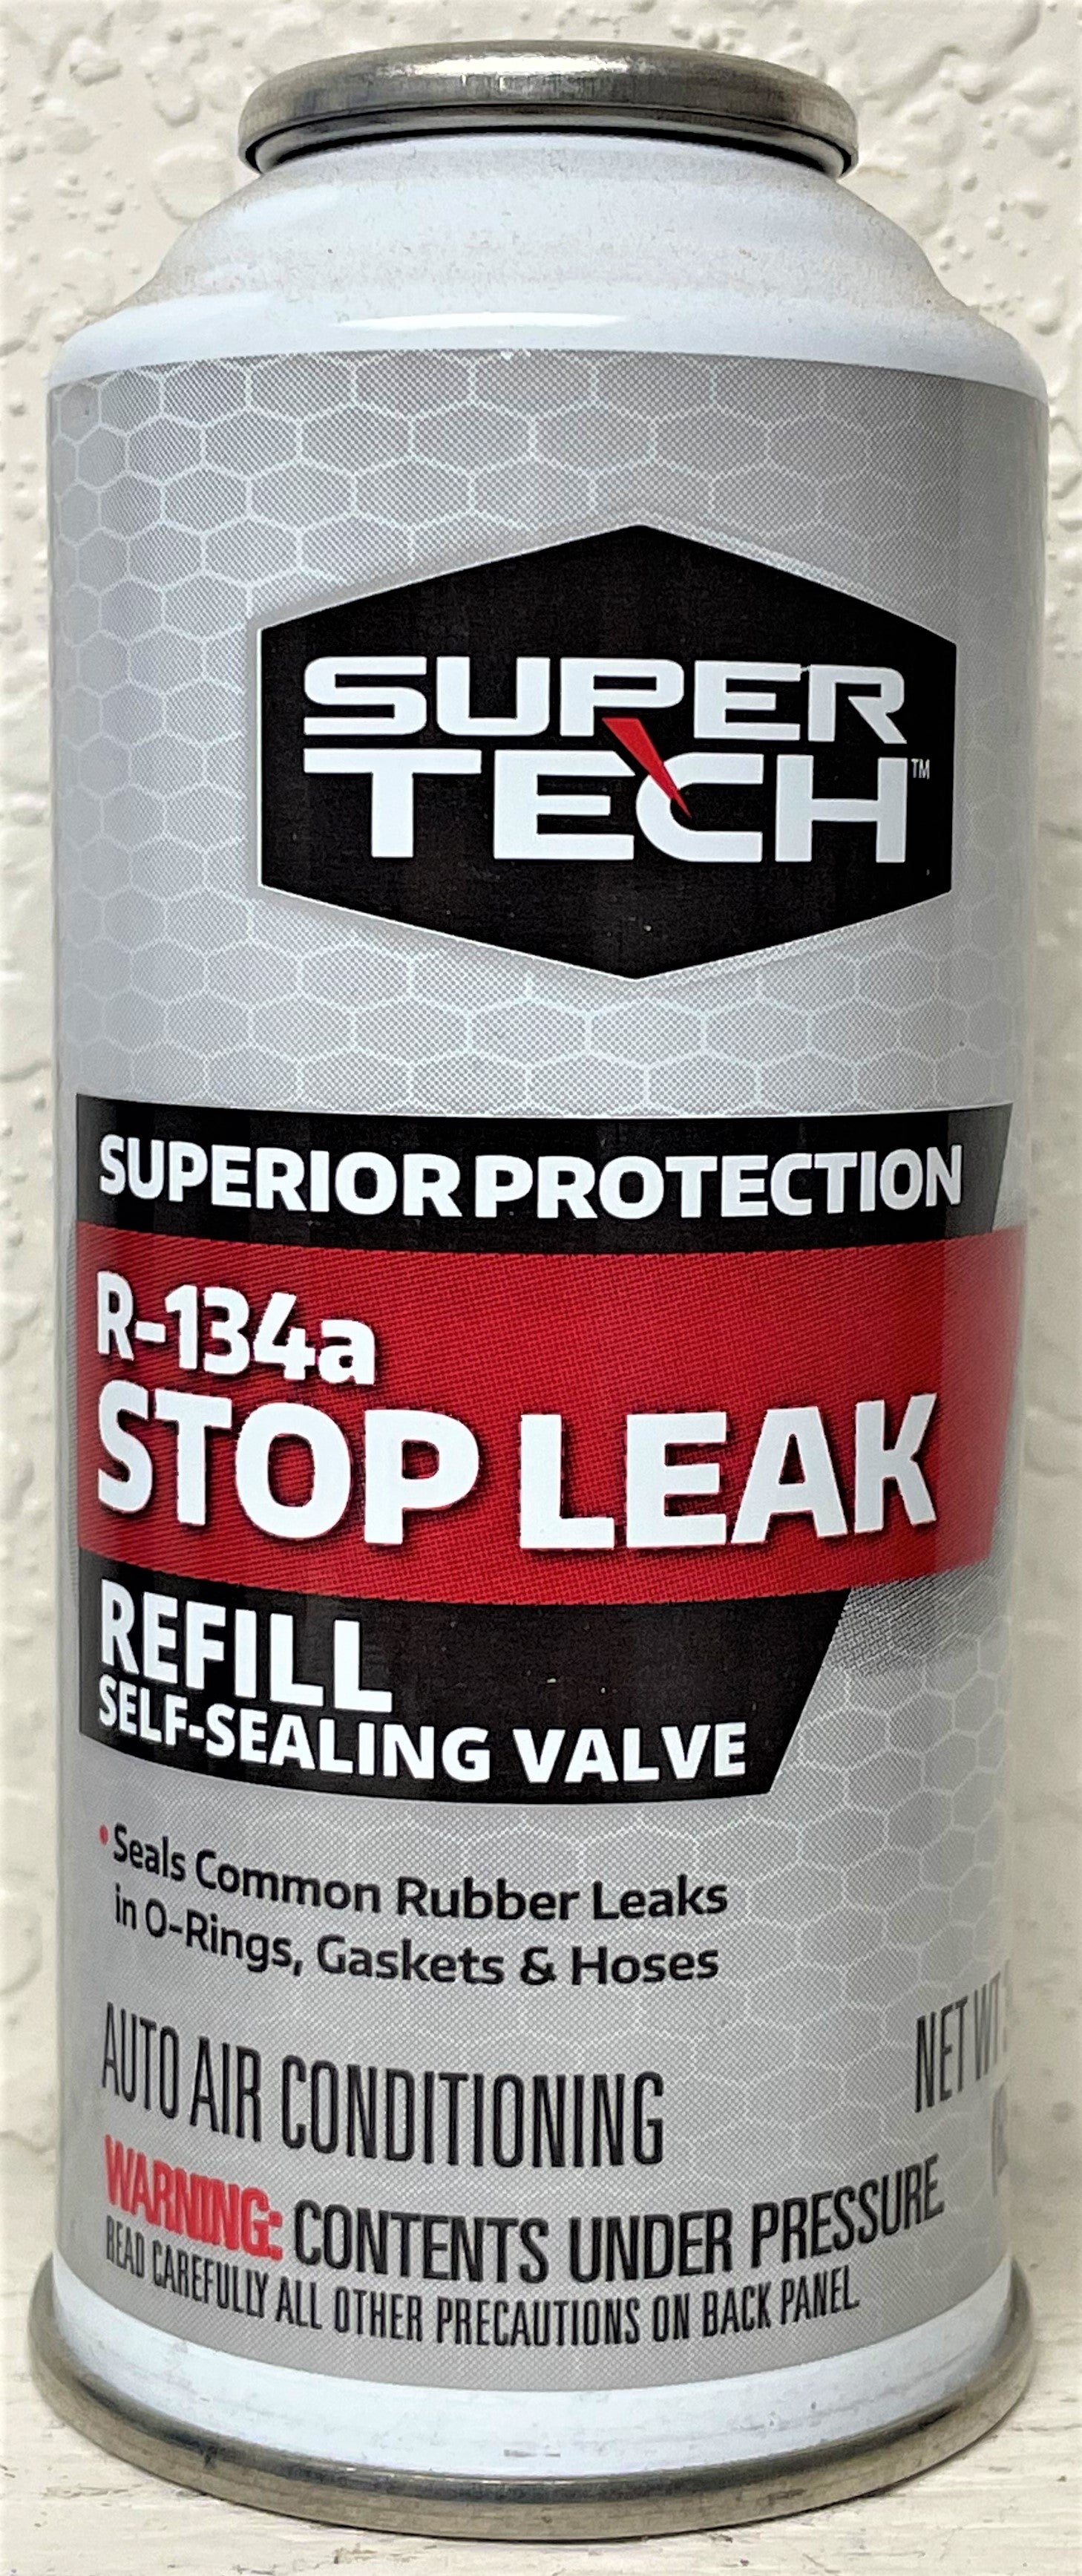 R134a Stop Leak With The New Self Sealing Valve 3 Oz Can Super Tech